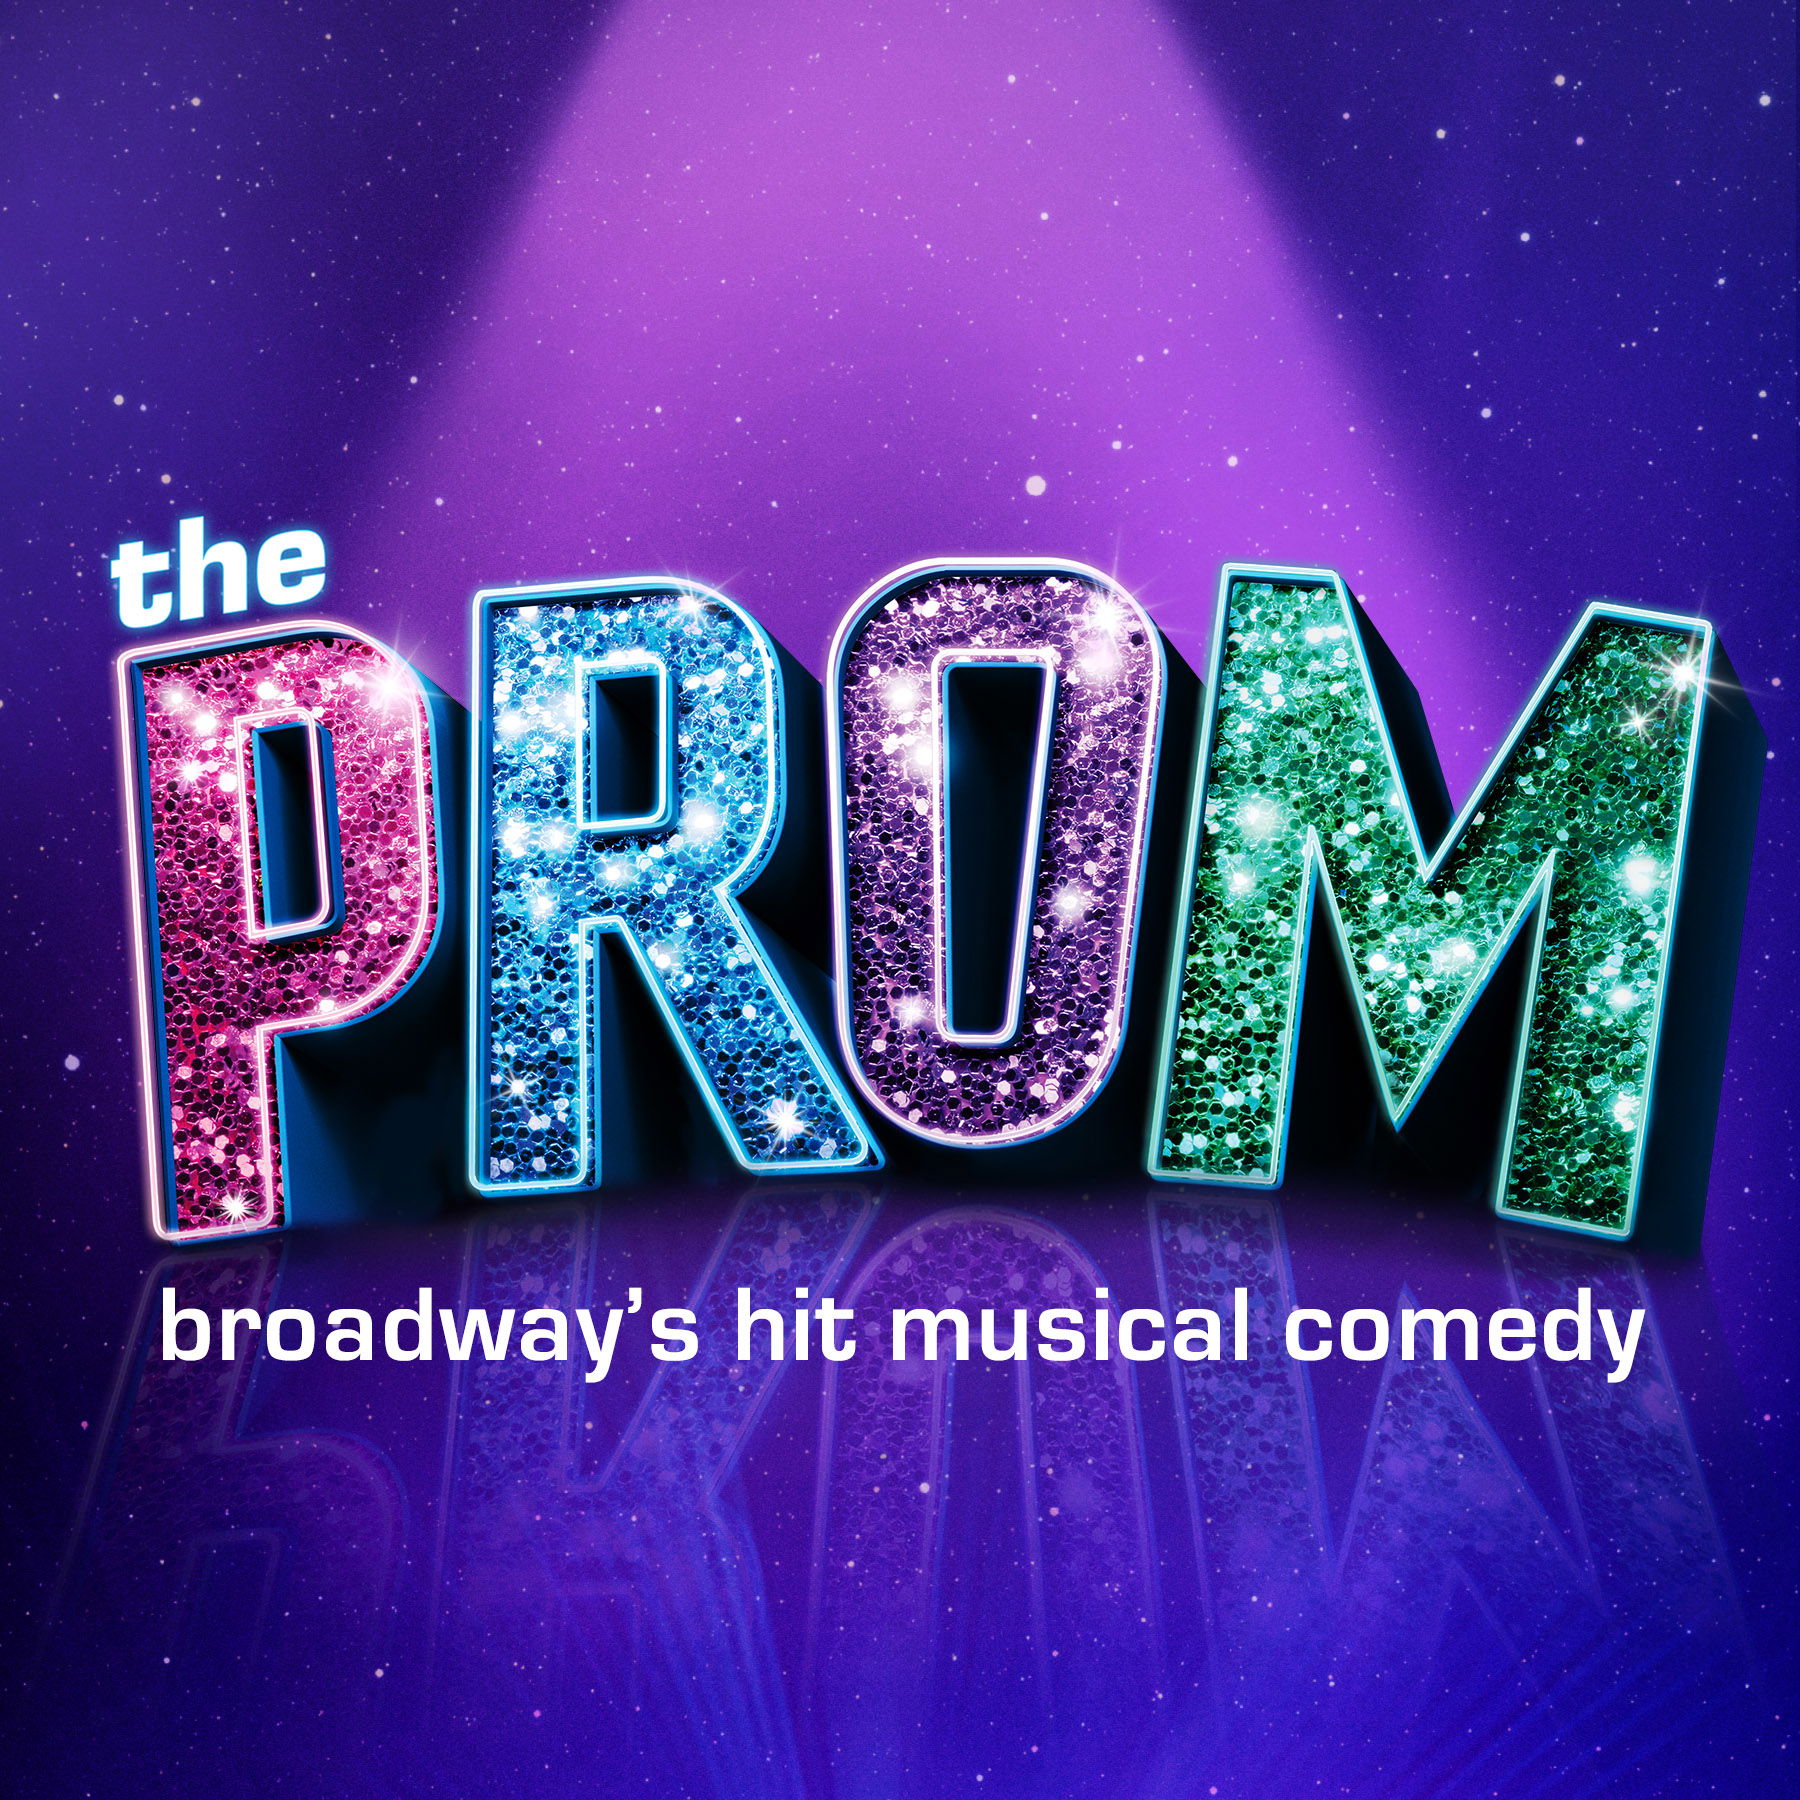 "The Prom" - by Chad Beguelin, Bob Martin & Matthew Sklar - Theatre at the Mount (Gardner, MA.)